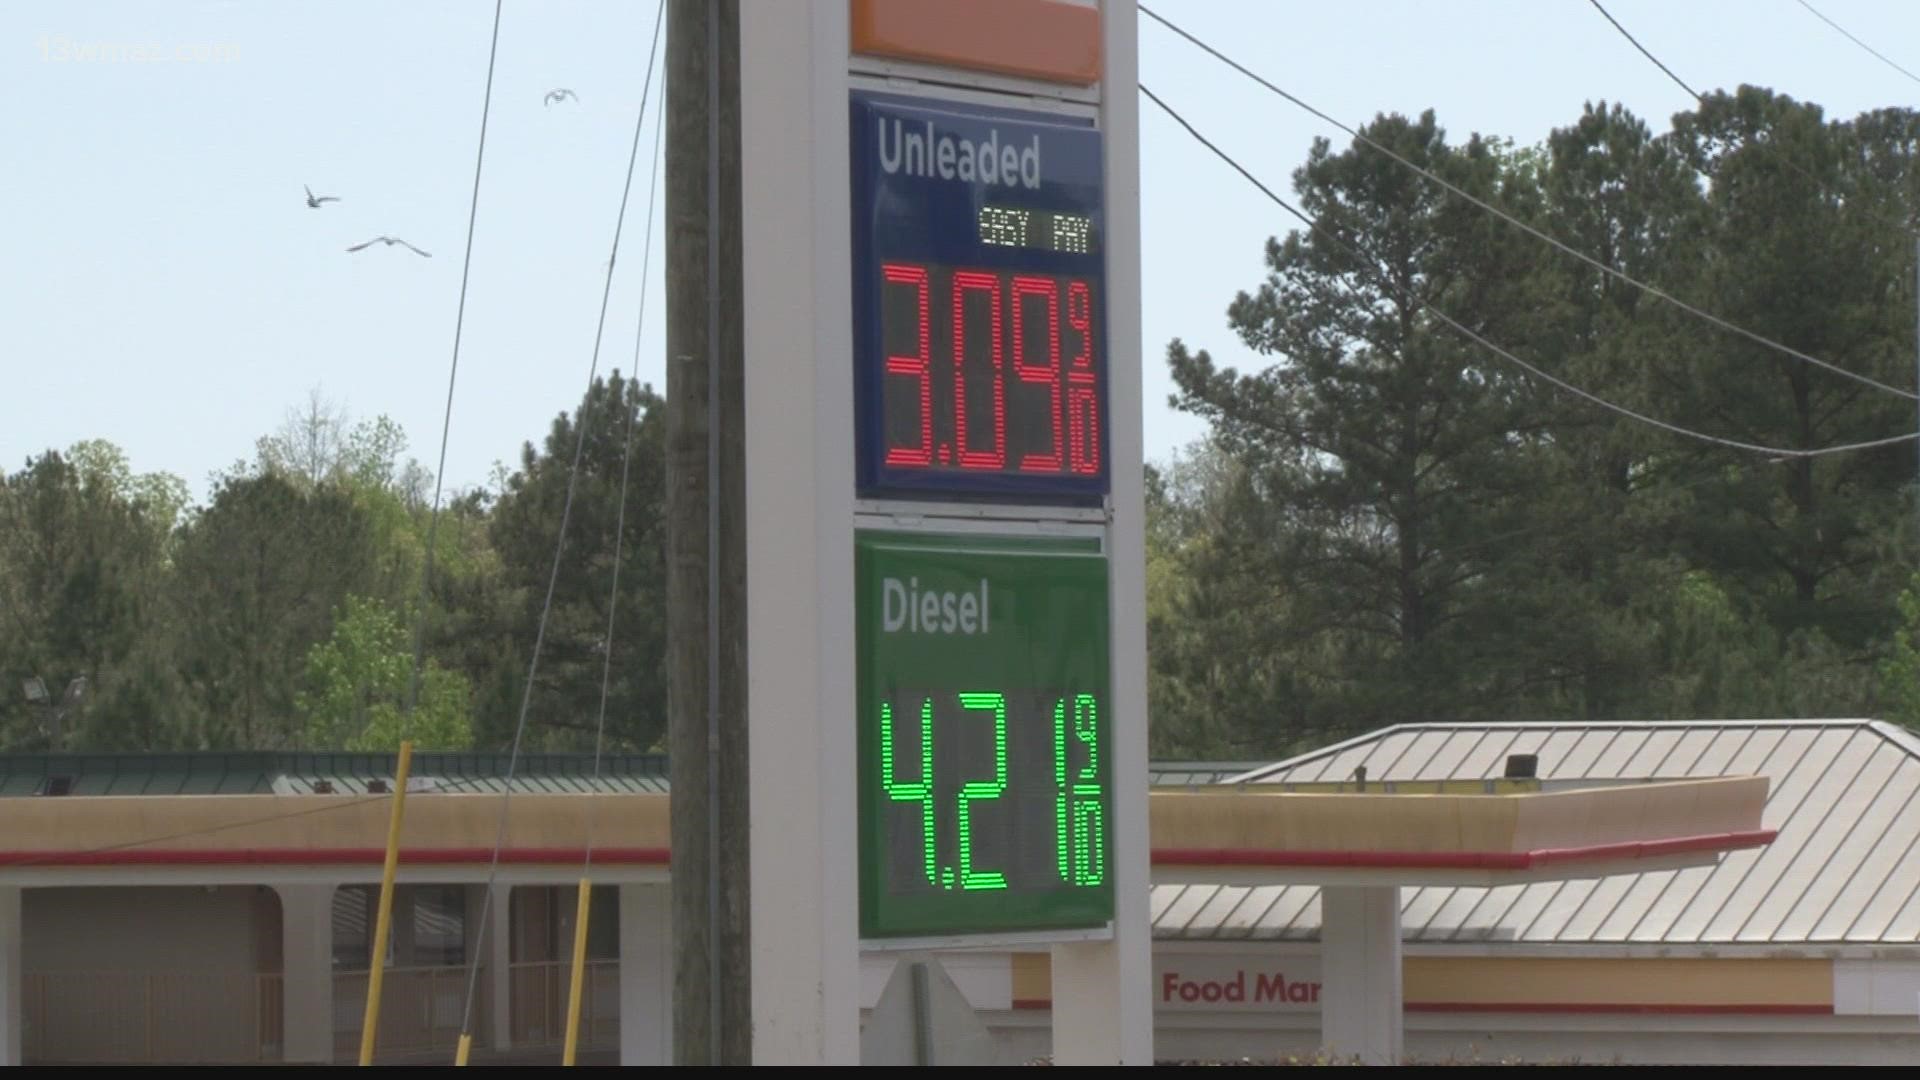 In Georgia, the average price of gas per gallon is $3.76, down 11 cents from a week ago.